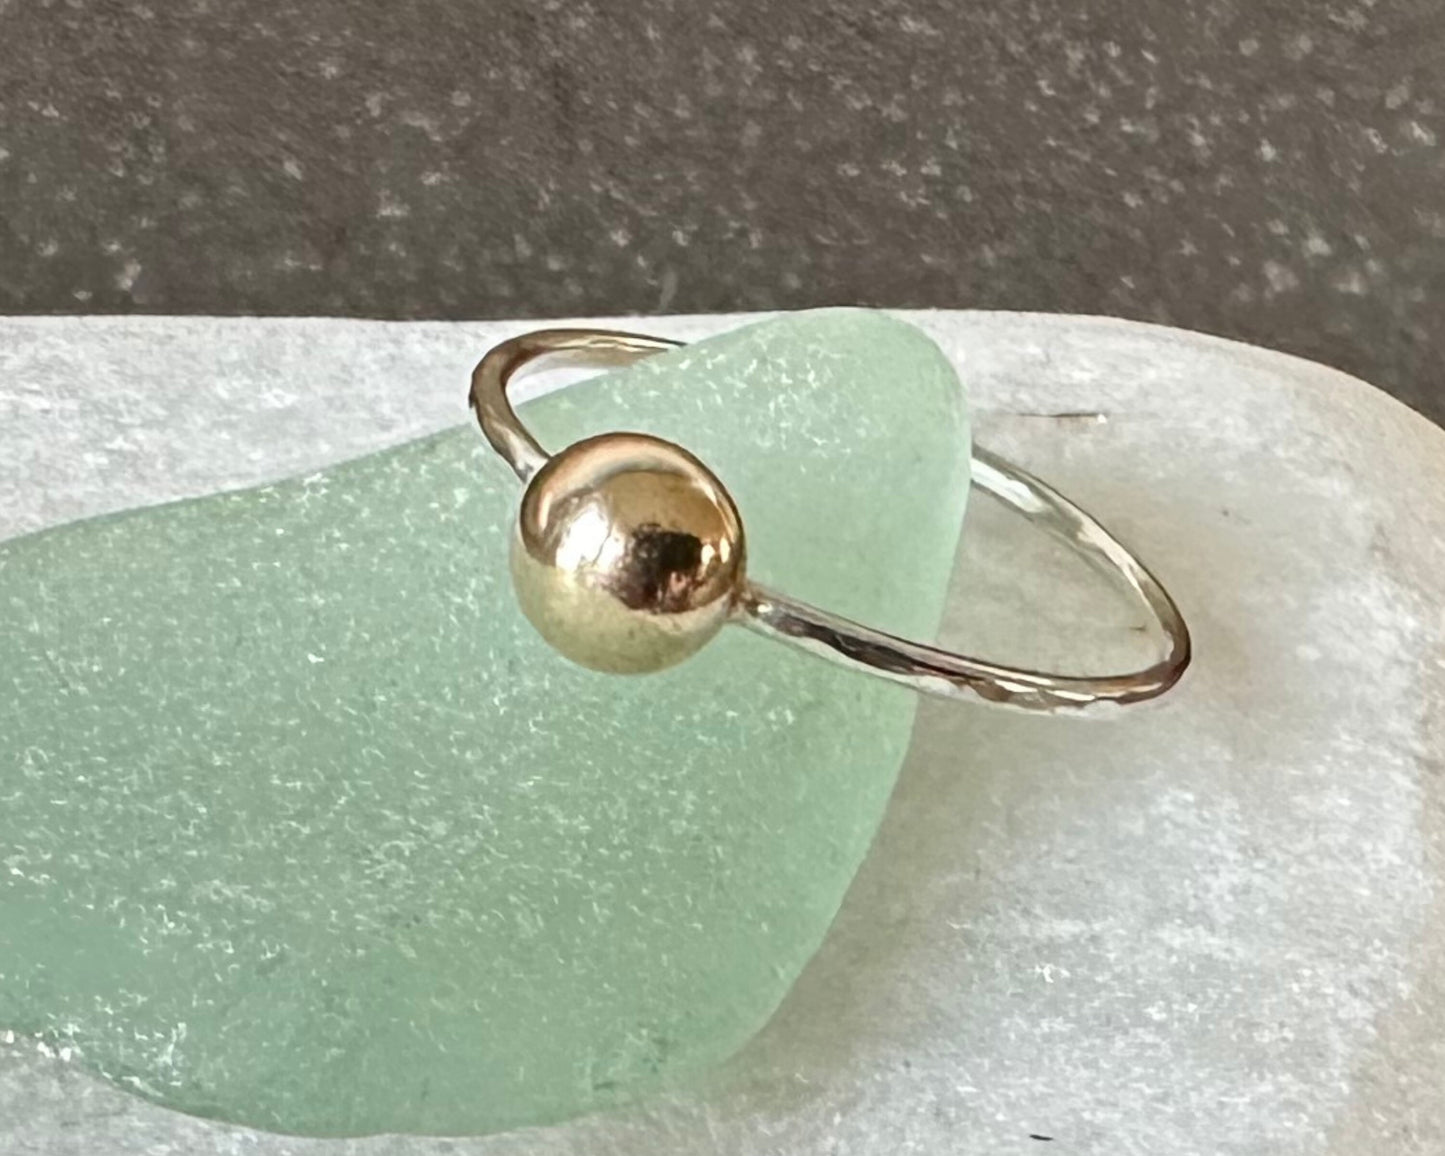 Large Solid 9ct Yellow Gold Nugget, Rose Gold Nugget, on a Hallmarked 1.2mm 925 Sterling Silver Ring, Hammered Ring Band, Stacking Ring